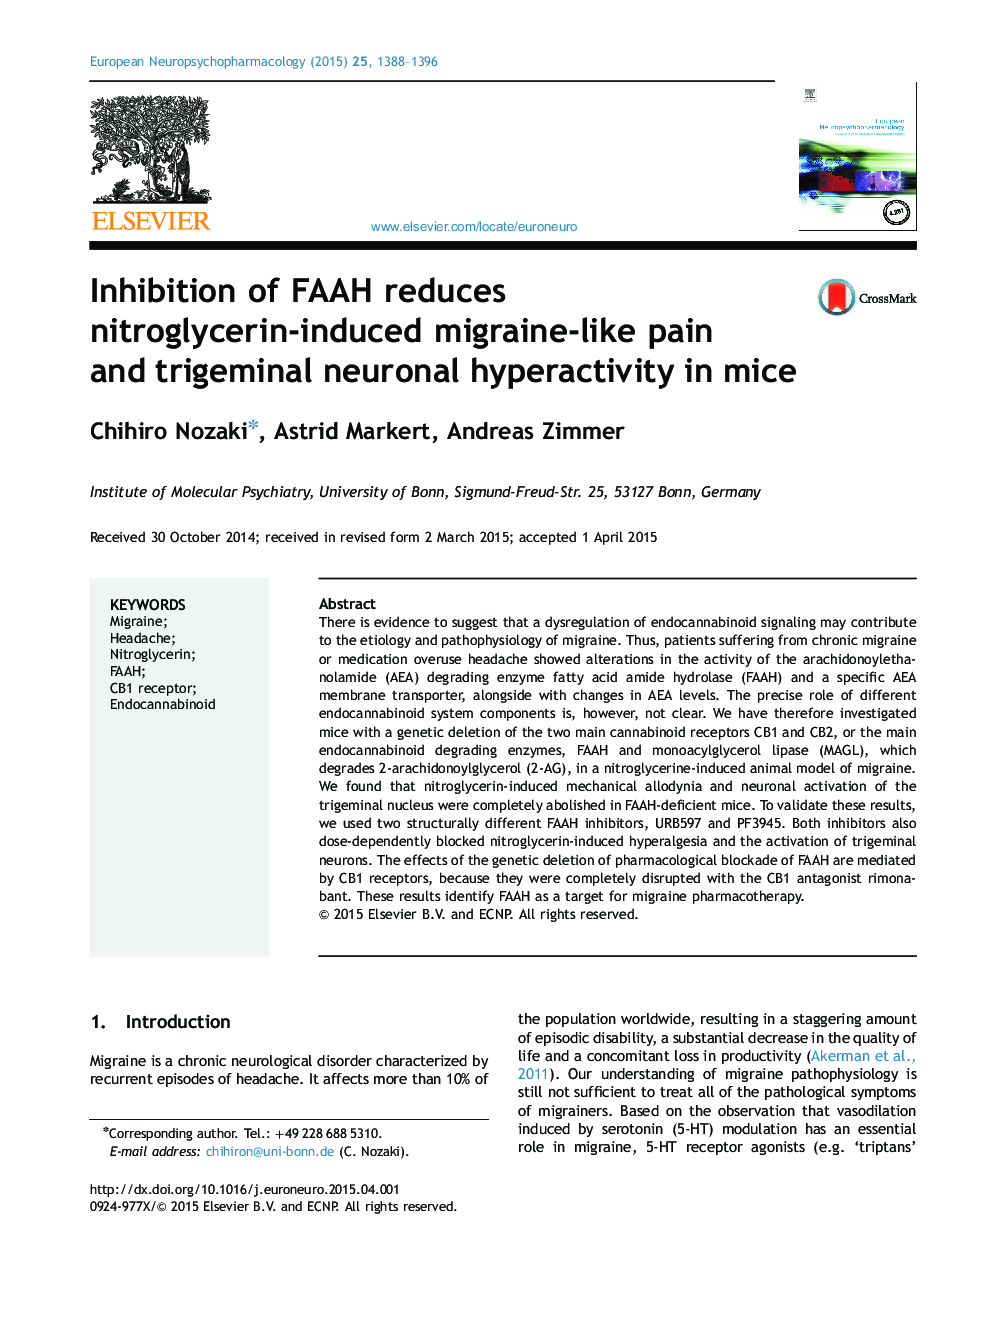 Inhibition of FAAH reduces nitroglycerin-induced migraine-like pain and trigeminal neuronal hyperactivity in mice